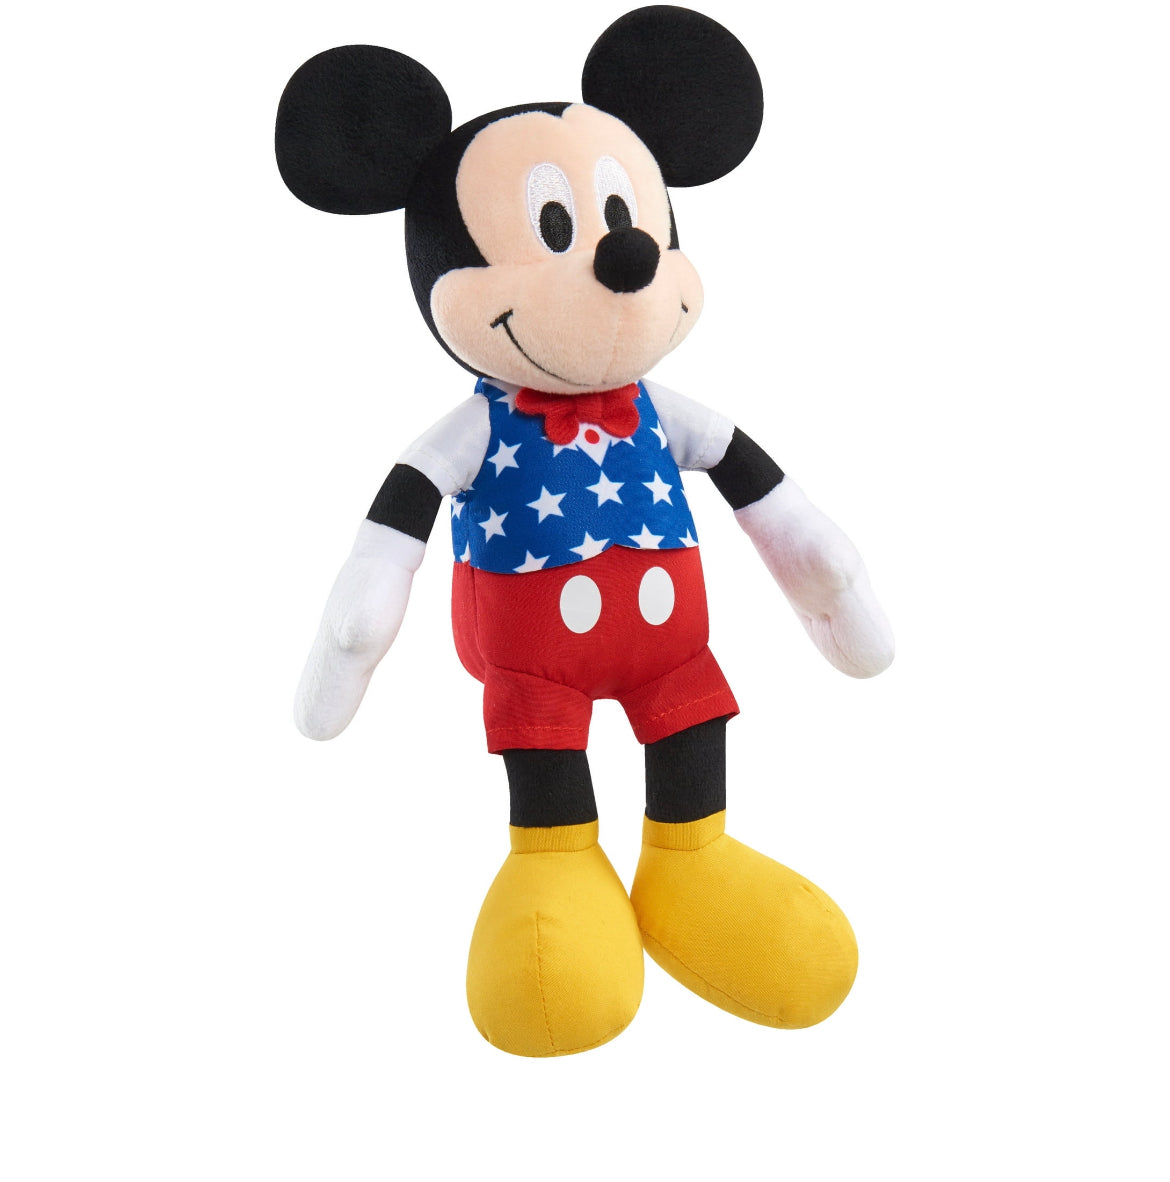 Disney Patriotic Bean Plush Mickey Mouse 4th of July